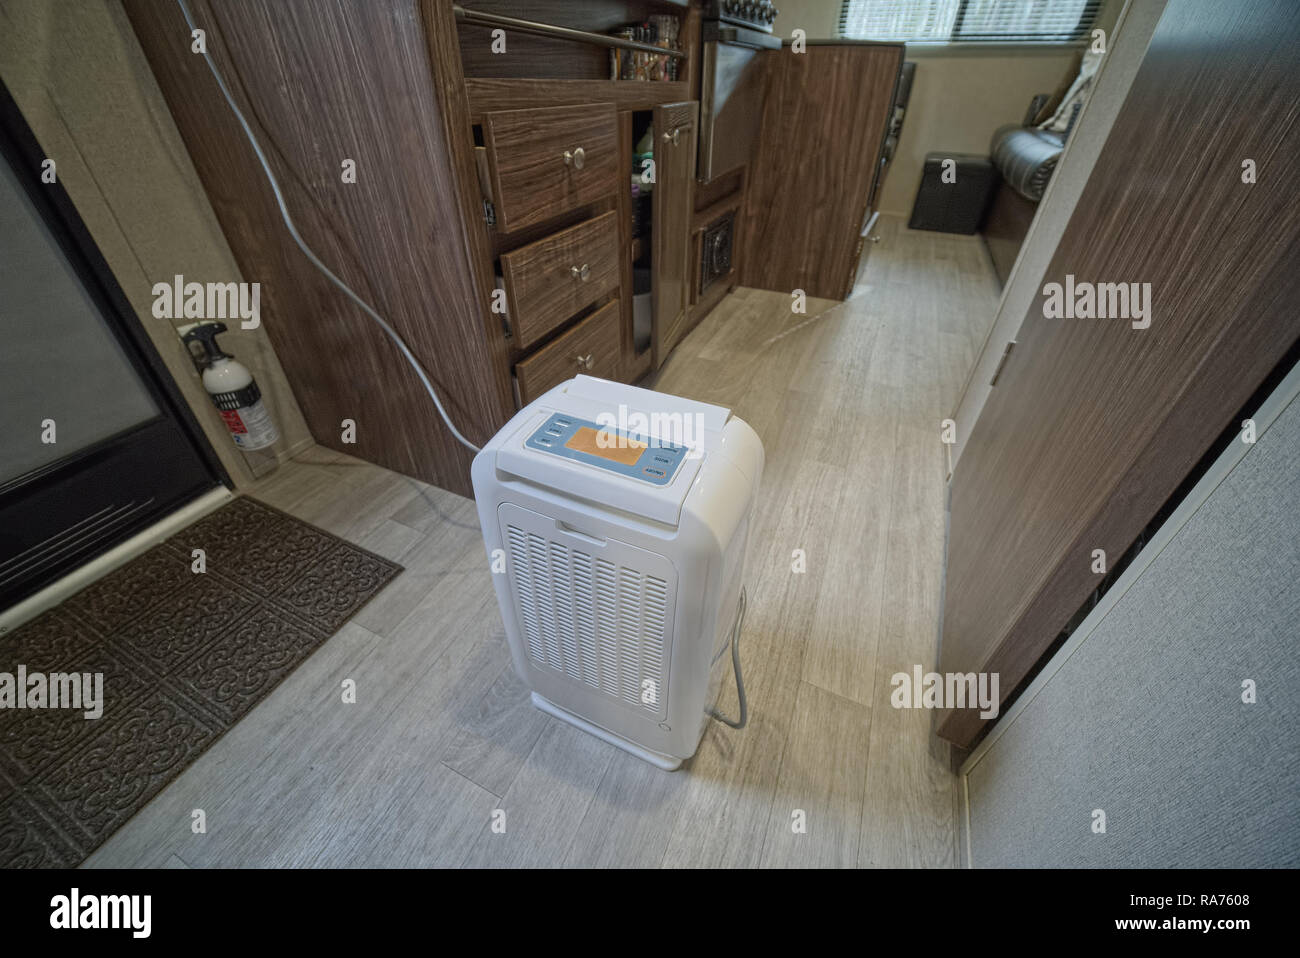 Desiccant dehumidifier inside RV travel trailer with drawers and cabinets open. Done to keep RV dry while in storage. Stock Photo